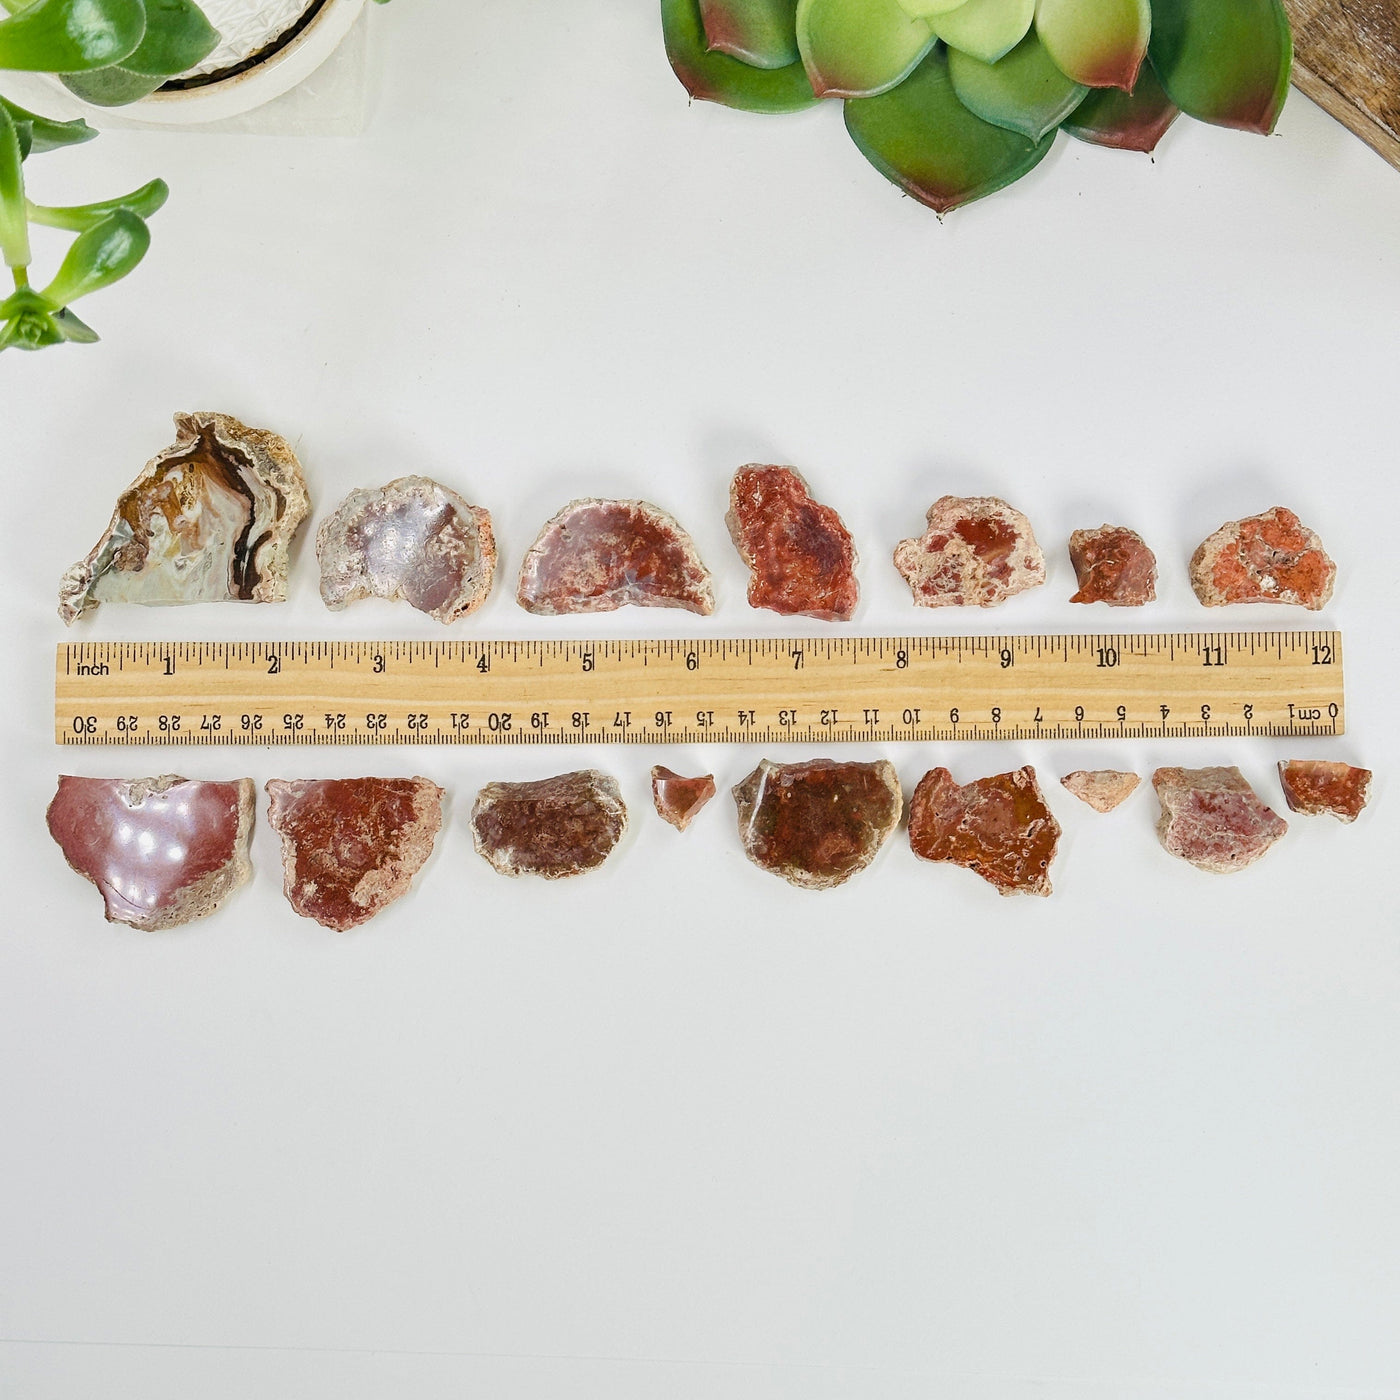 petrified wood pieces next to a ruler for size reference